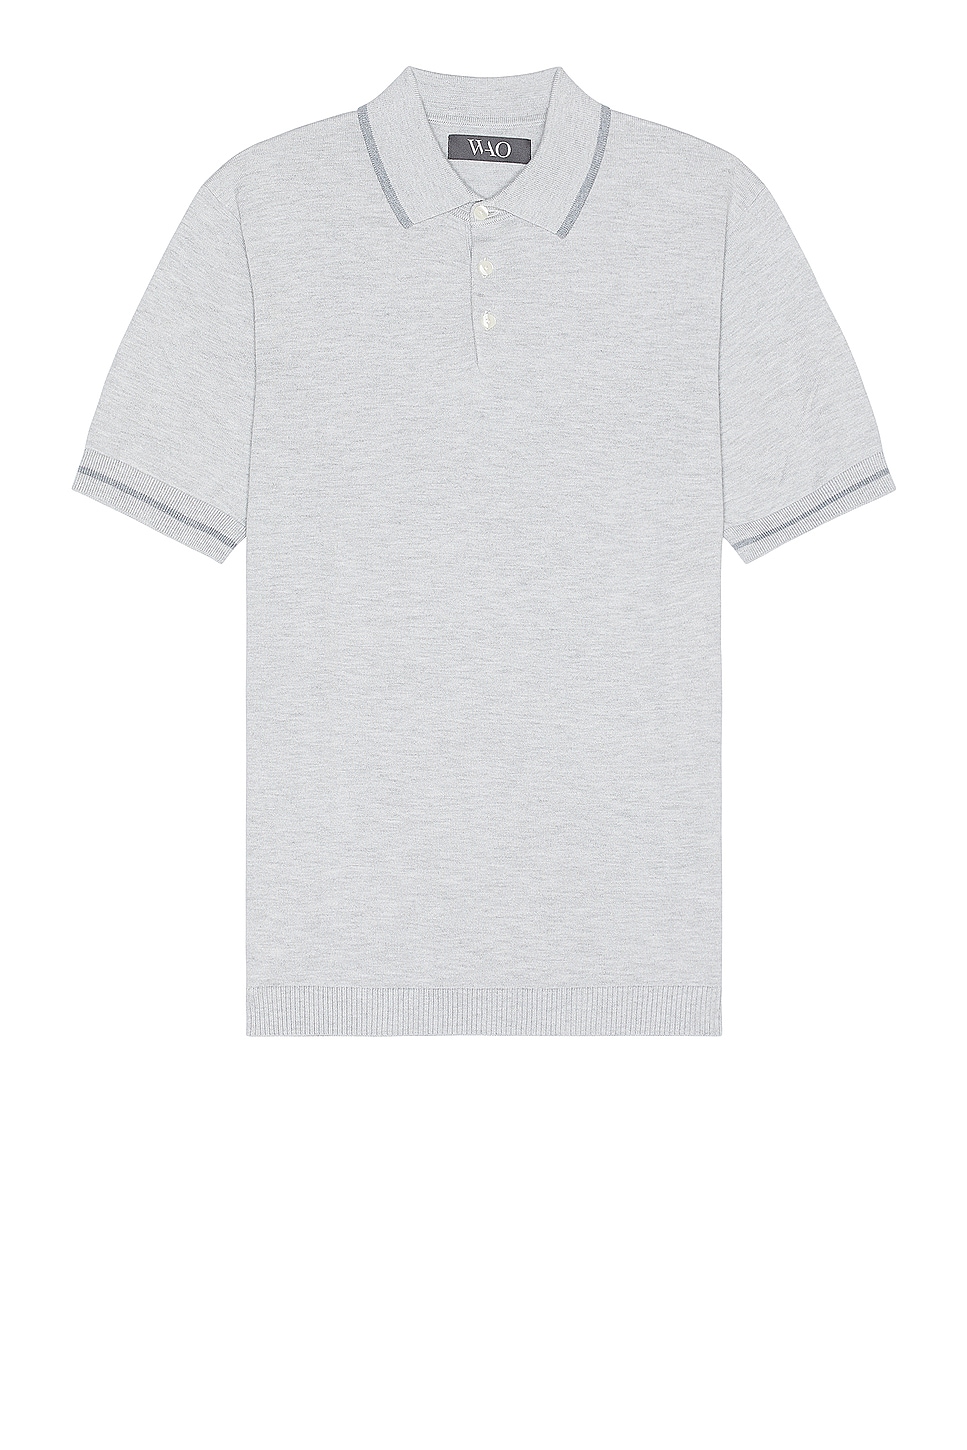 Image 1 of WAO Everyday Luxe Polo in Heather Grey